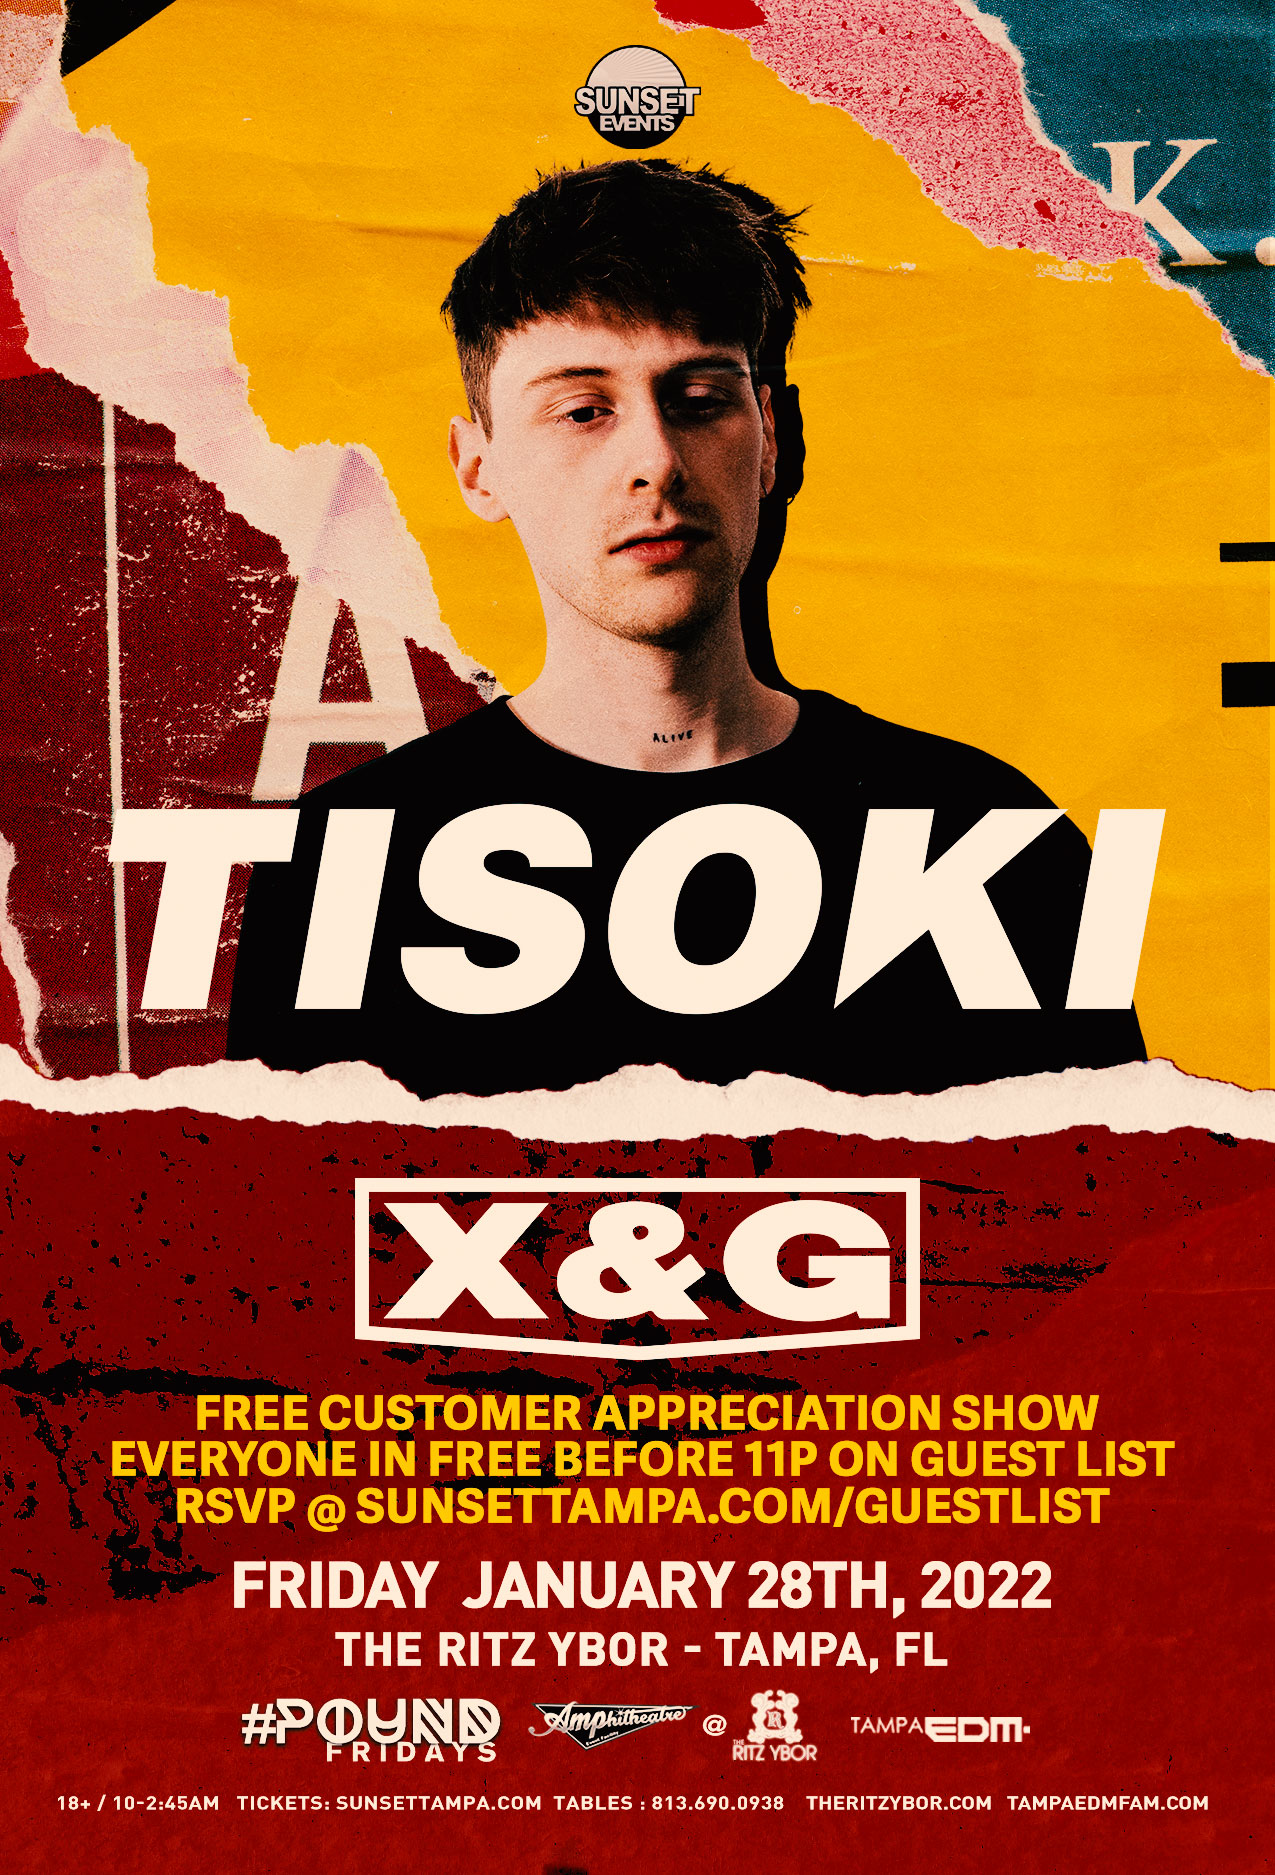 Tisoki with X&G for #POUND Fridays at The RITZ Ybor – 1/28/2022